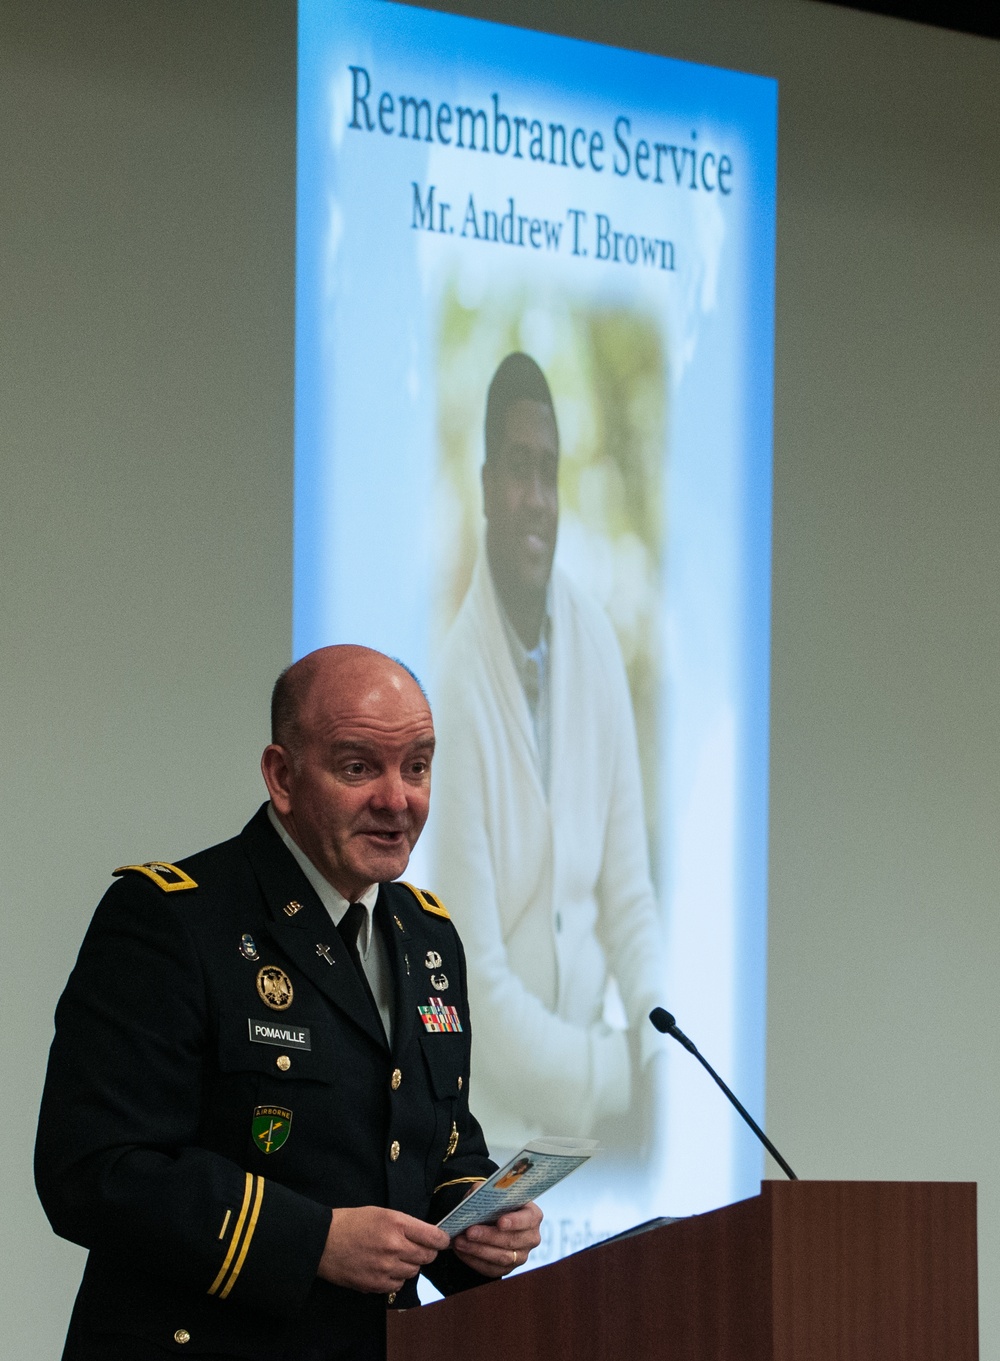 FORSCOM/USARC pays tribute to one of their own